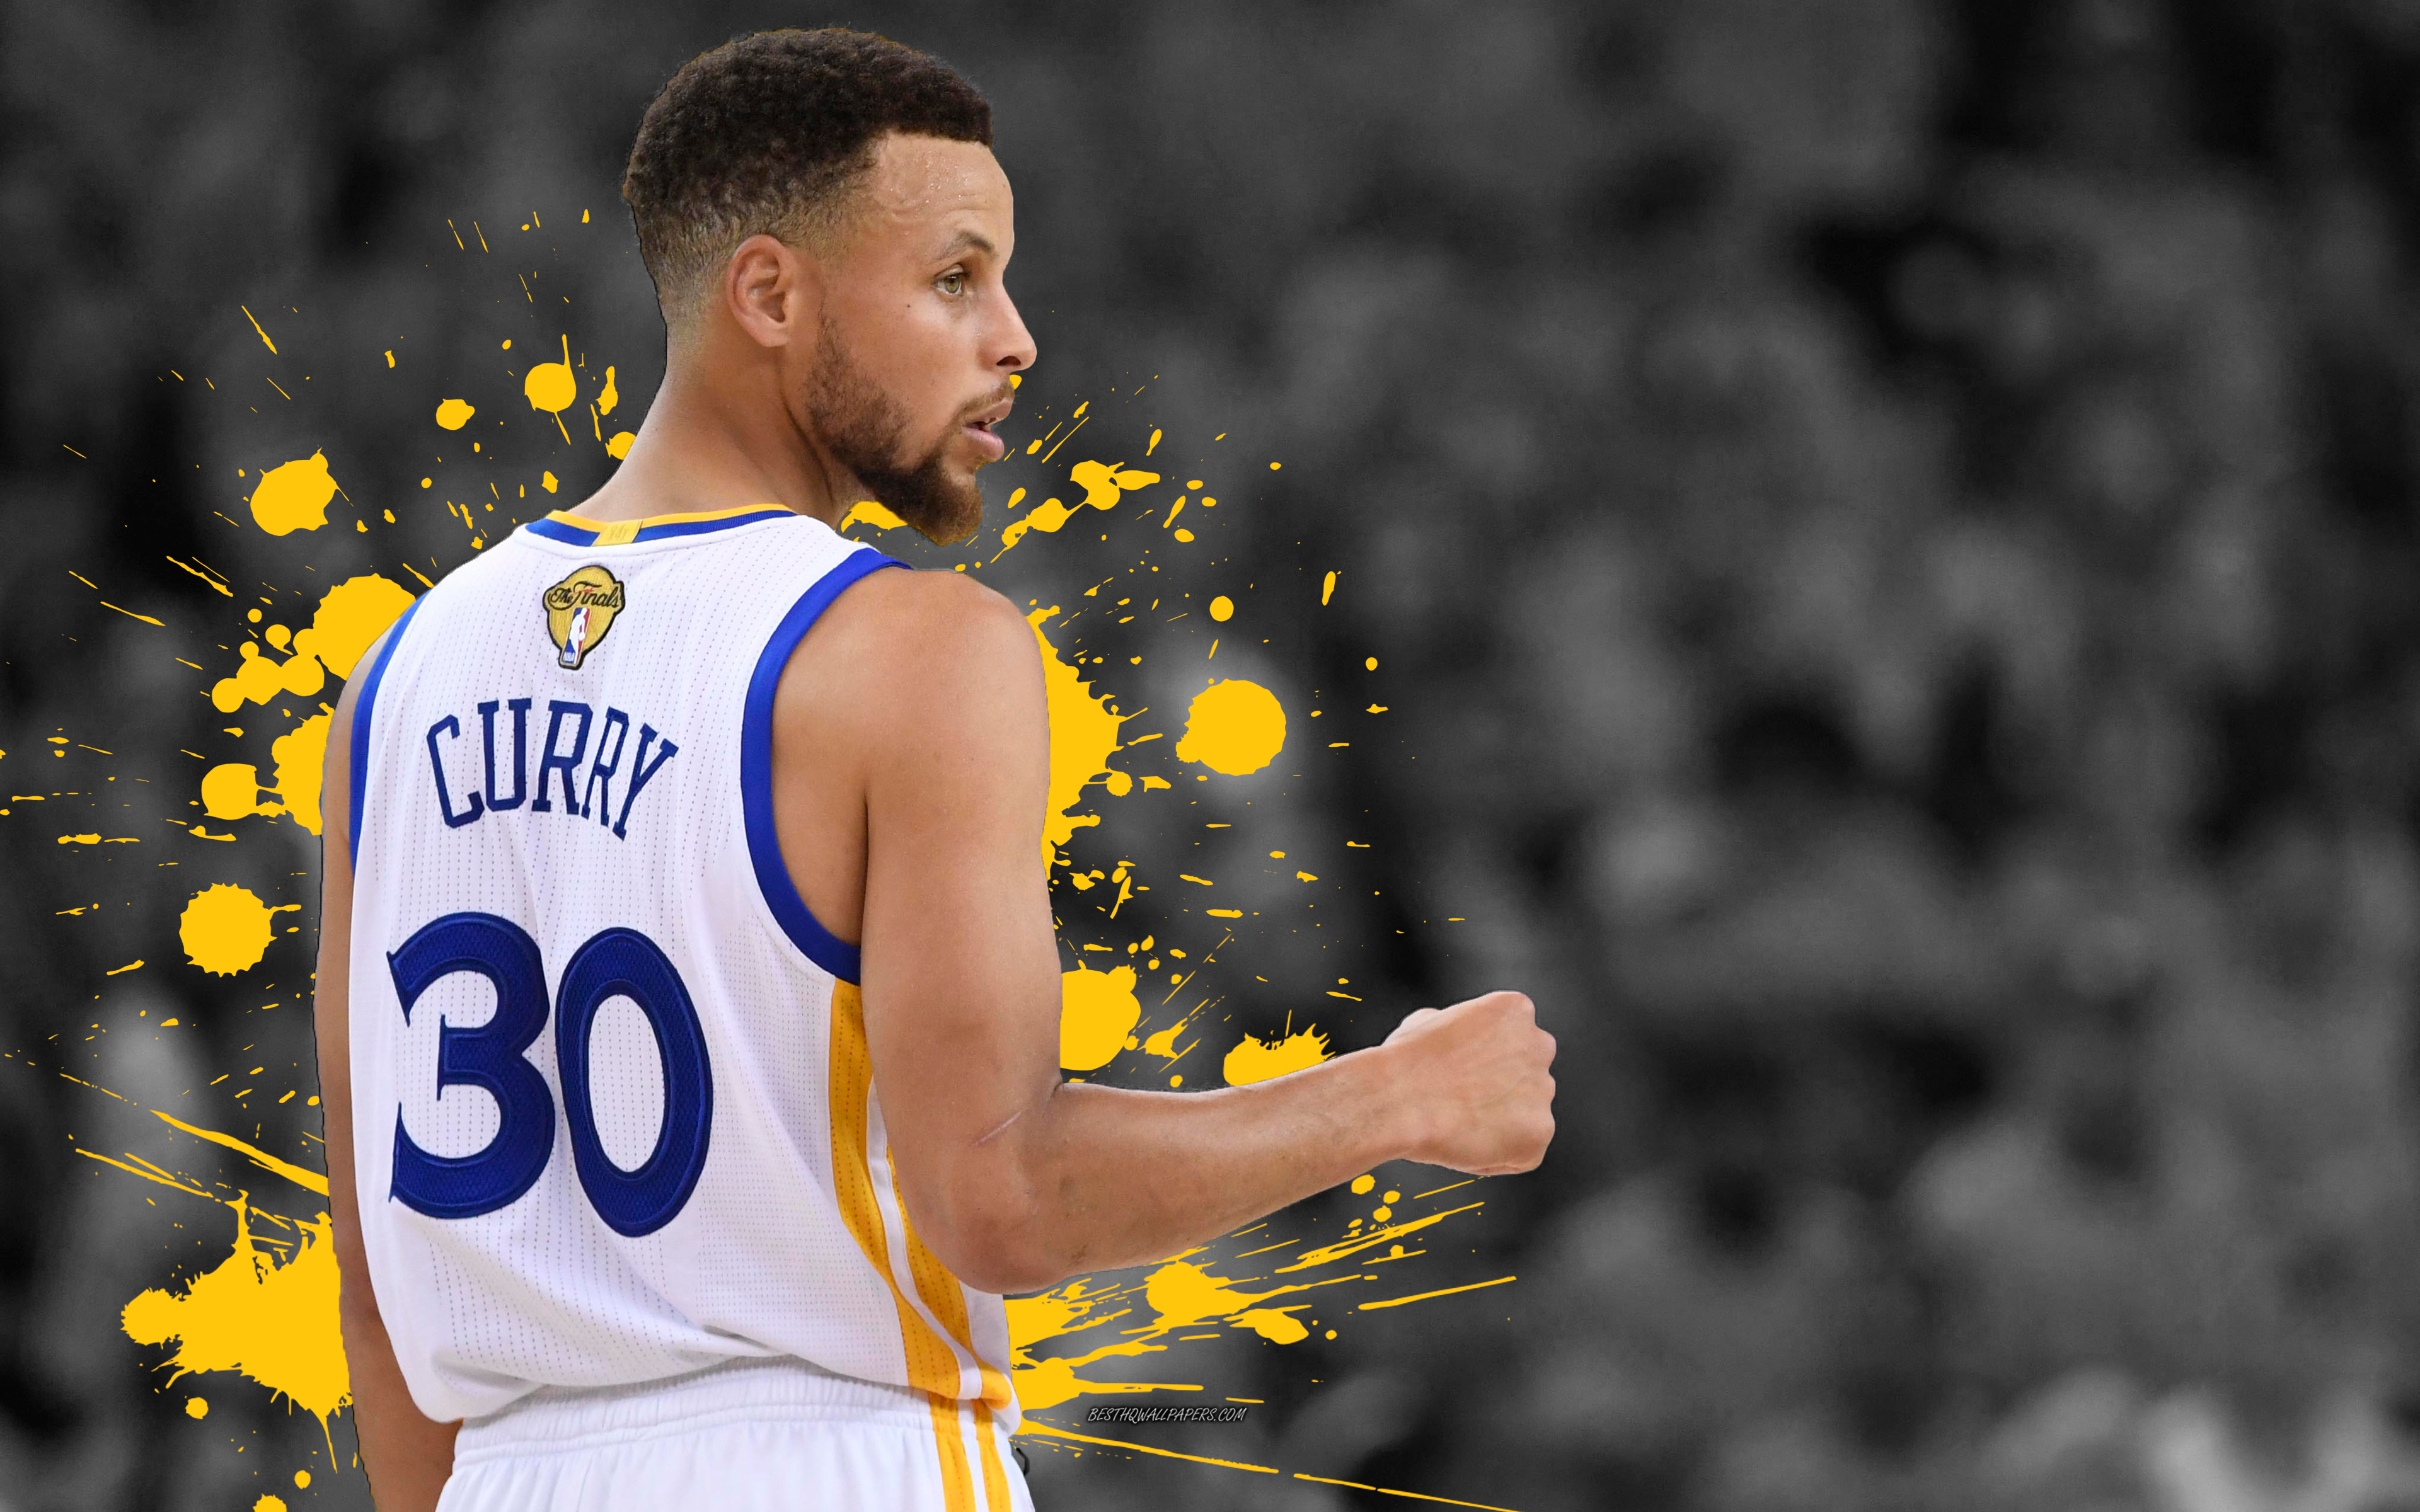 Download wallpaper Stephen Curry, 4k, basketball players, NBA, Golden State Warriors, grunge, basketball, art for desktop with resolution 3840x2400. High Quality HD picture wallpaper